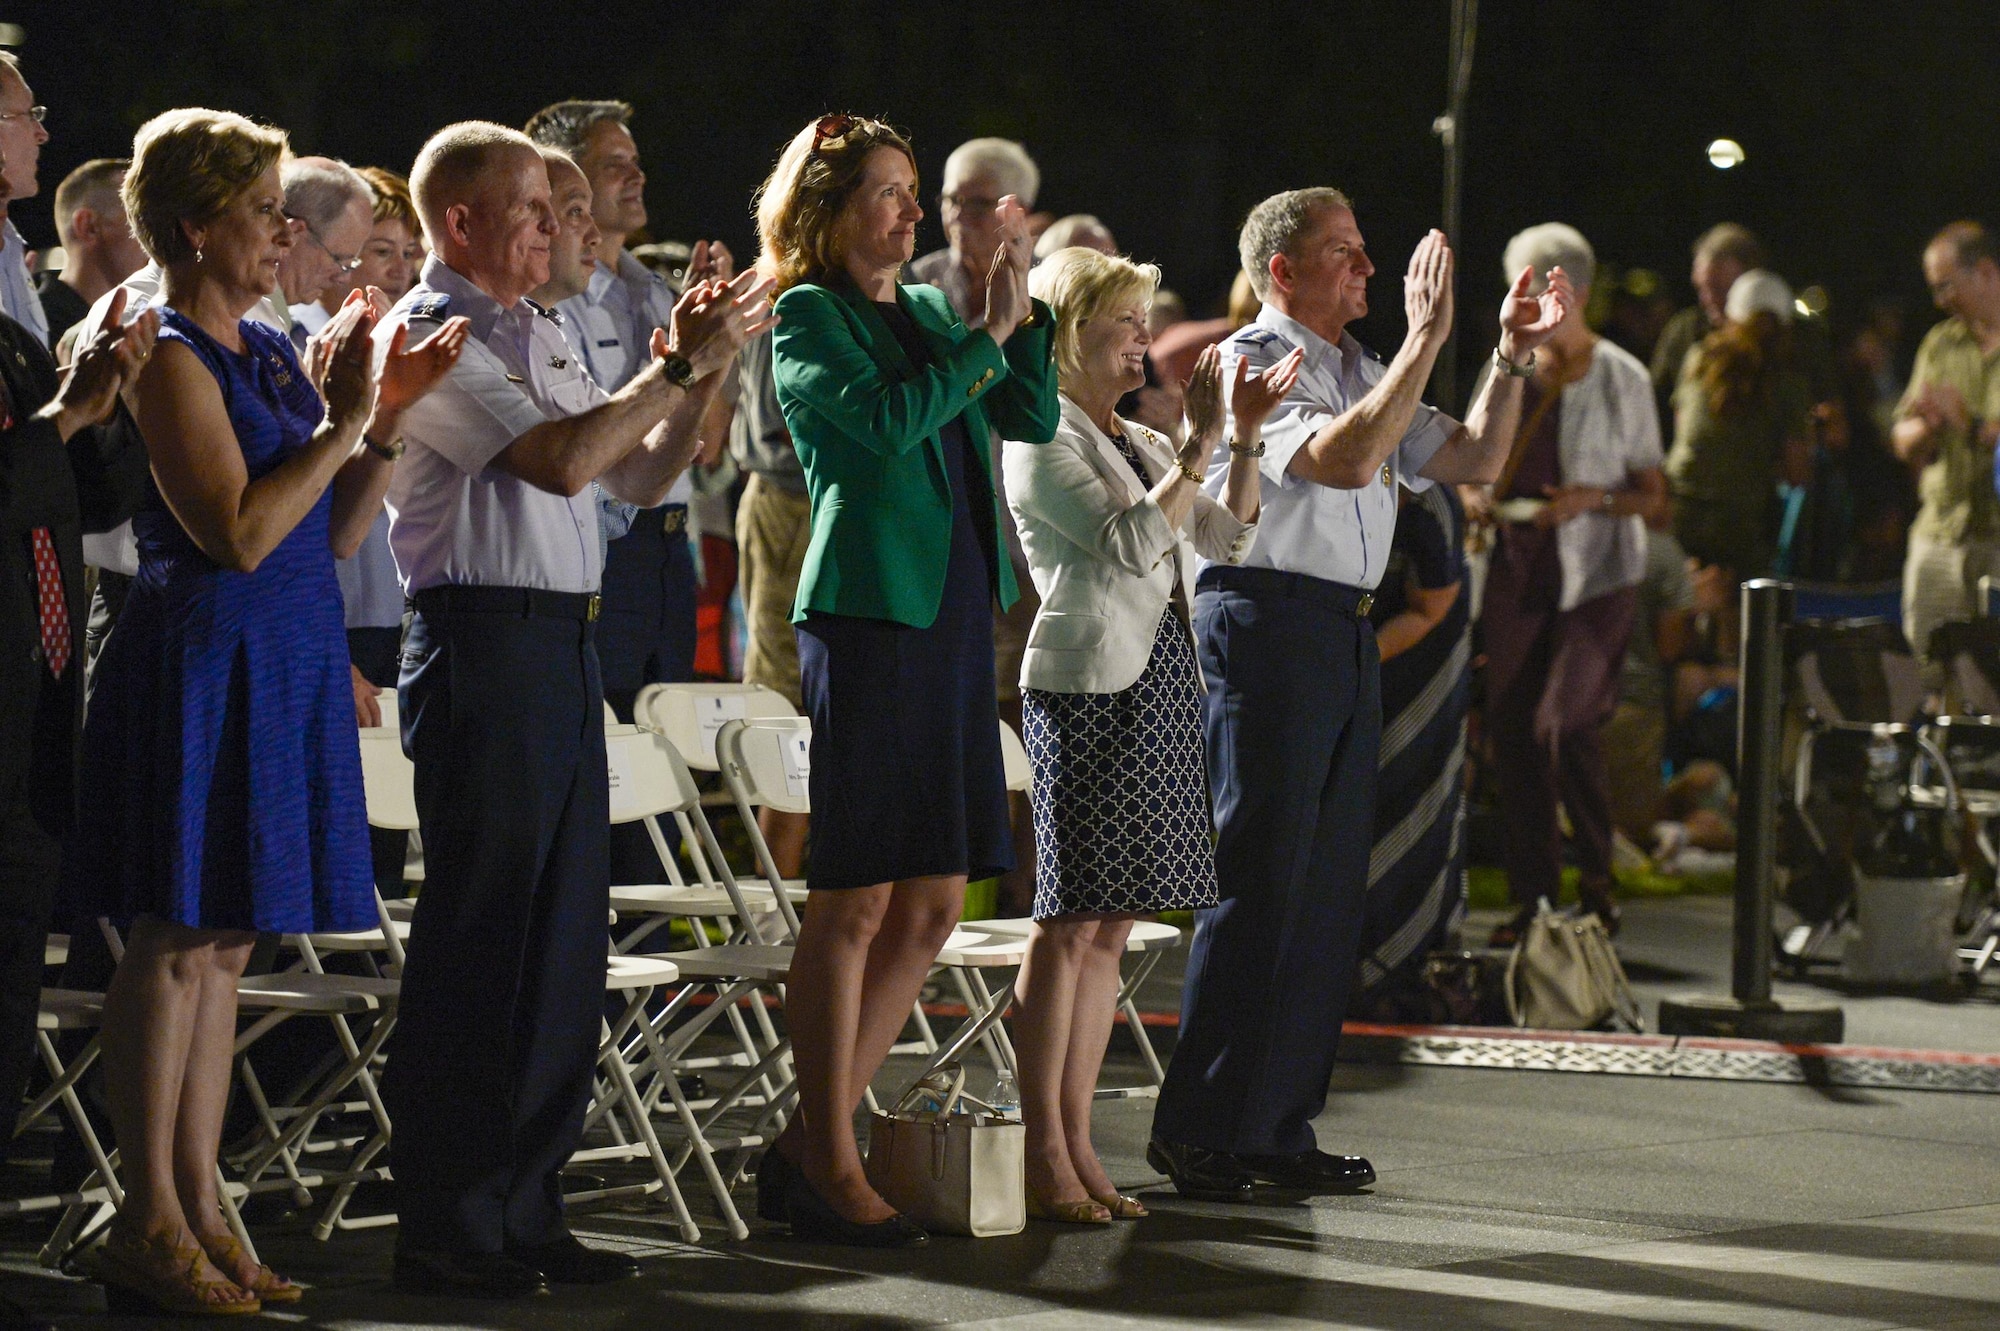 Nancy Wilson, Vice Chief of Staff Gen. Stephen W. Wilson, Air Force Undersecretary Lisa S. Disbrow, Dawn Goldfein and Chief of Staff Gen. Dave Goldfein applaud the U.S. Air Force Band’s performance held at the Air Force Memorial to honor Vietnam War veterans Aug. 26, 2016, in Arlington, Va. Prior to attending the concert, Disbrow and Goldfein welcomed Wilson as the service's new vice chief of staff at a reception in the Fort Myer Officer's Club. (U.S. Air Force photo/Tech. Sgt. Joshua L. DeMotts)